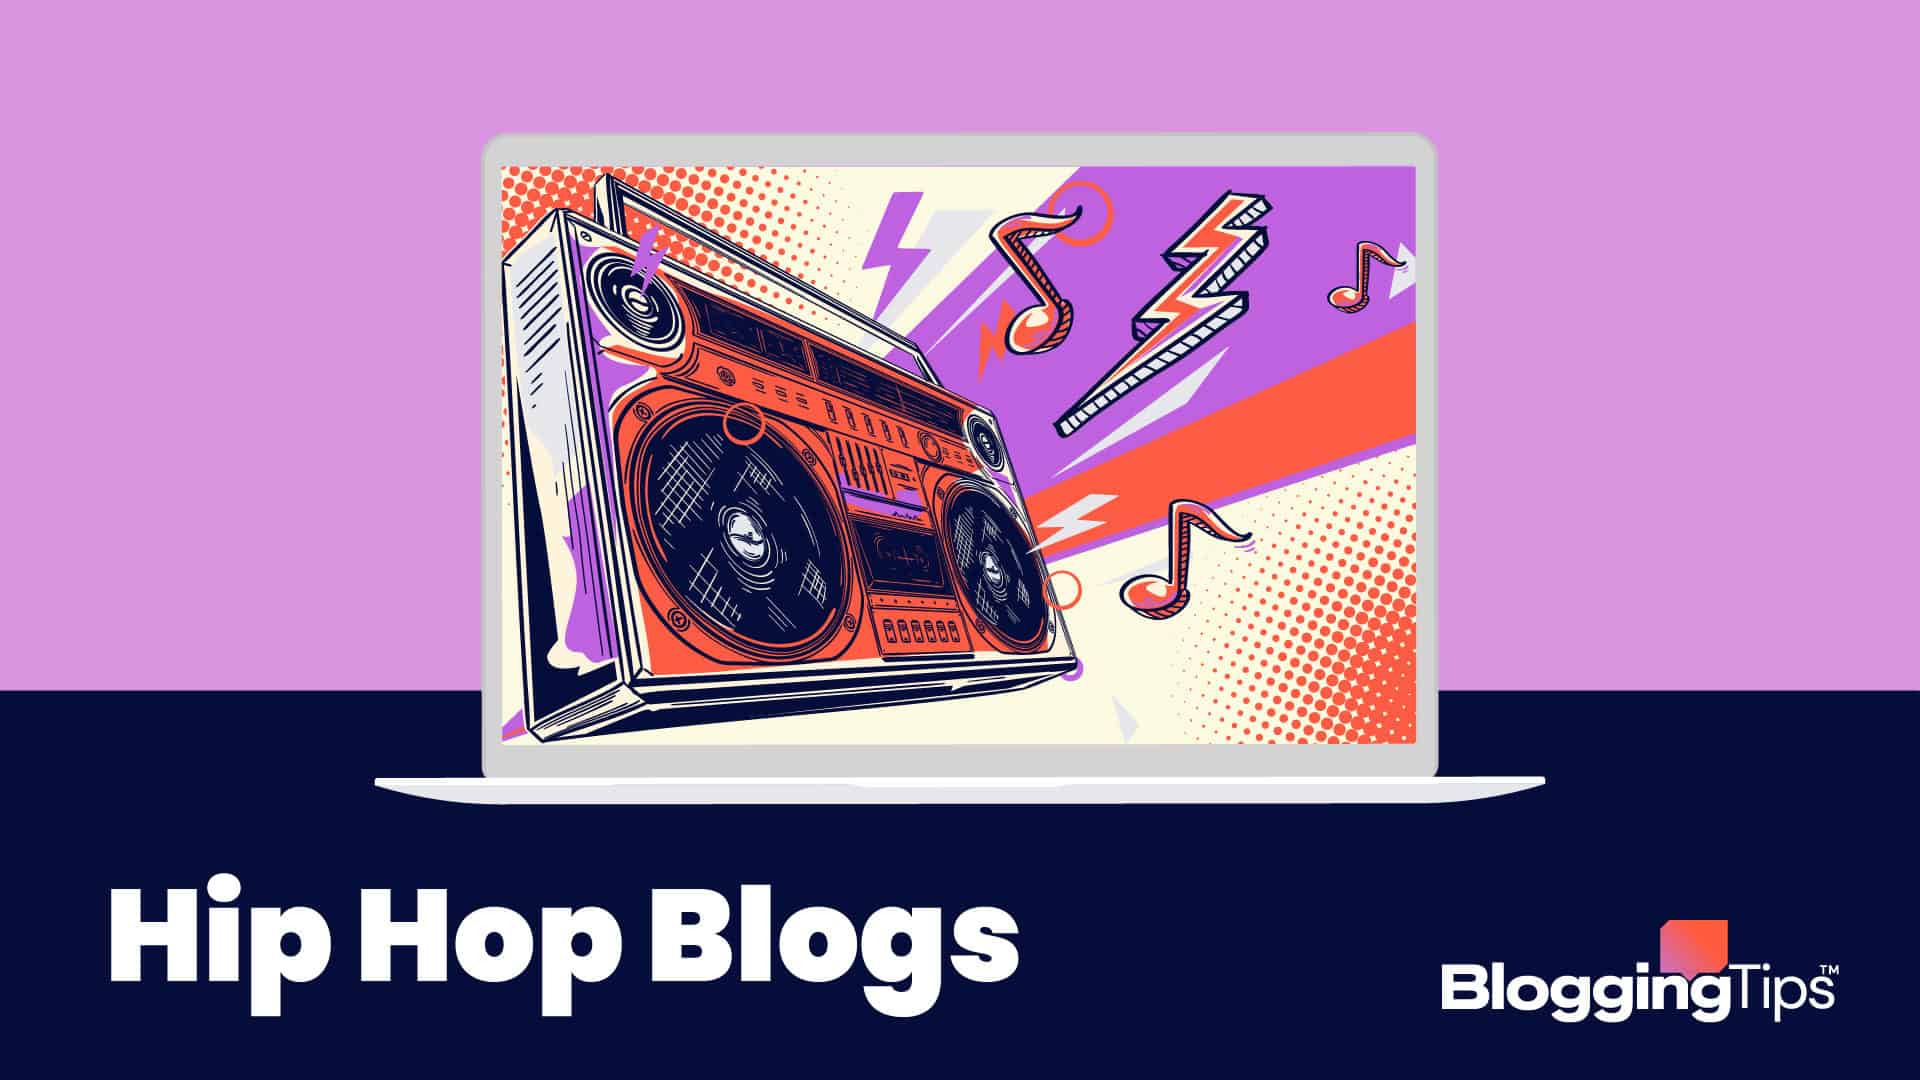 vector graphic showing an illustration of hip hop music with the big block text 